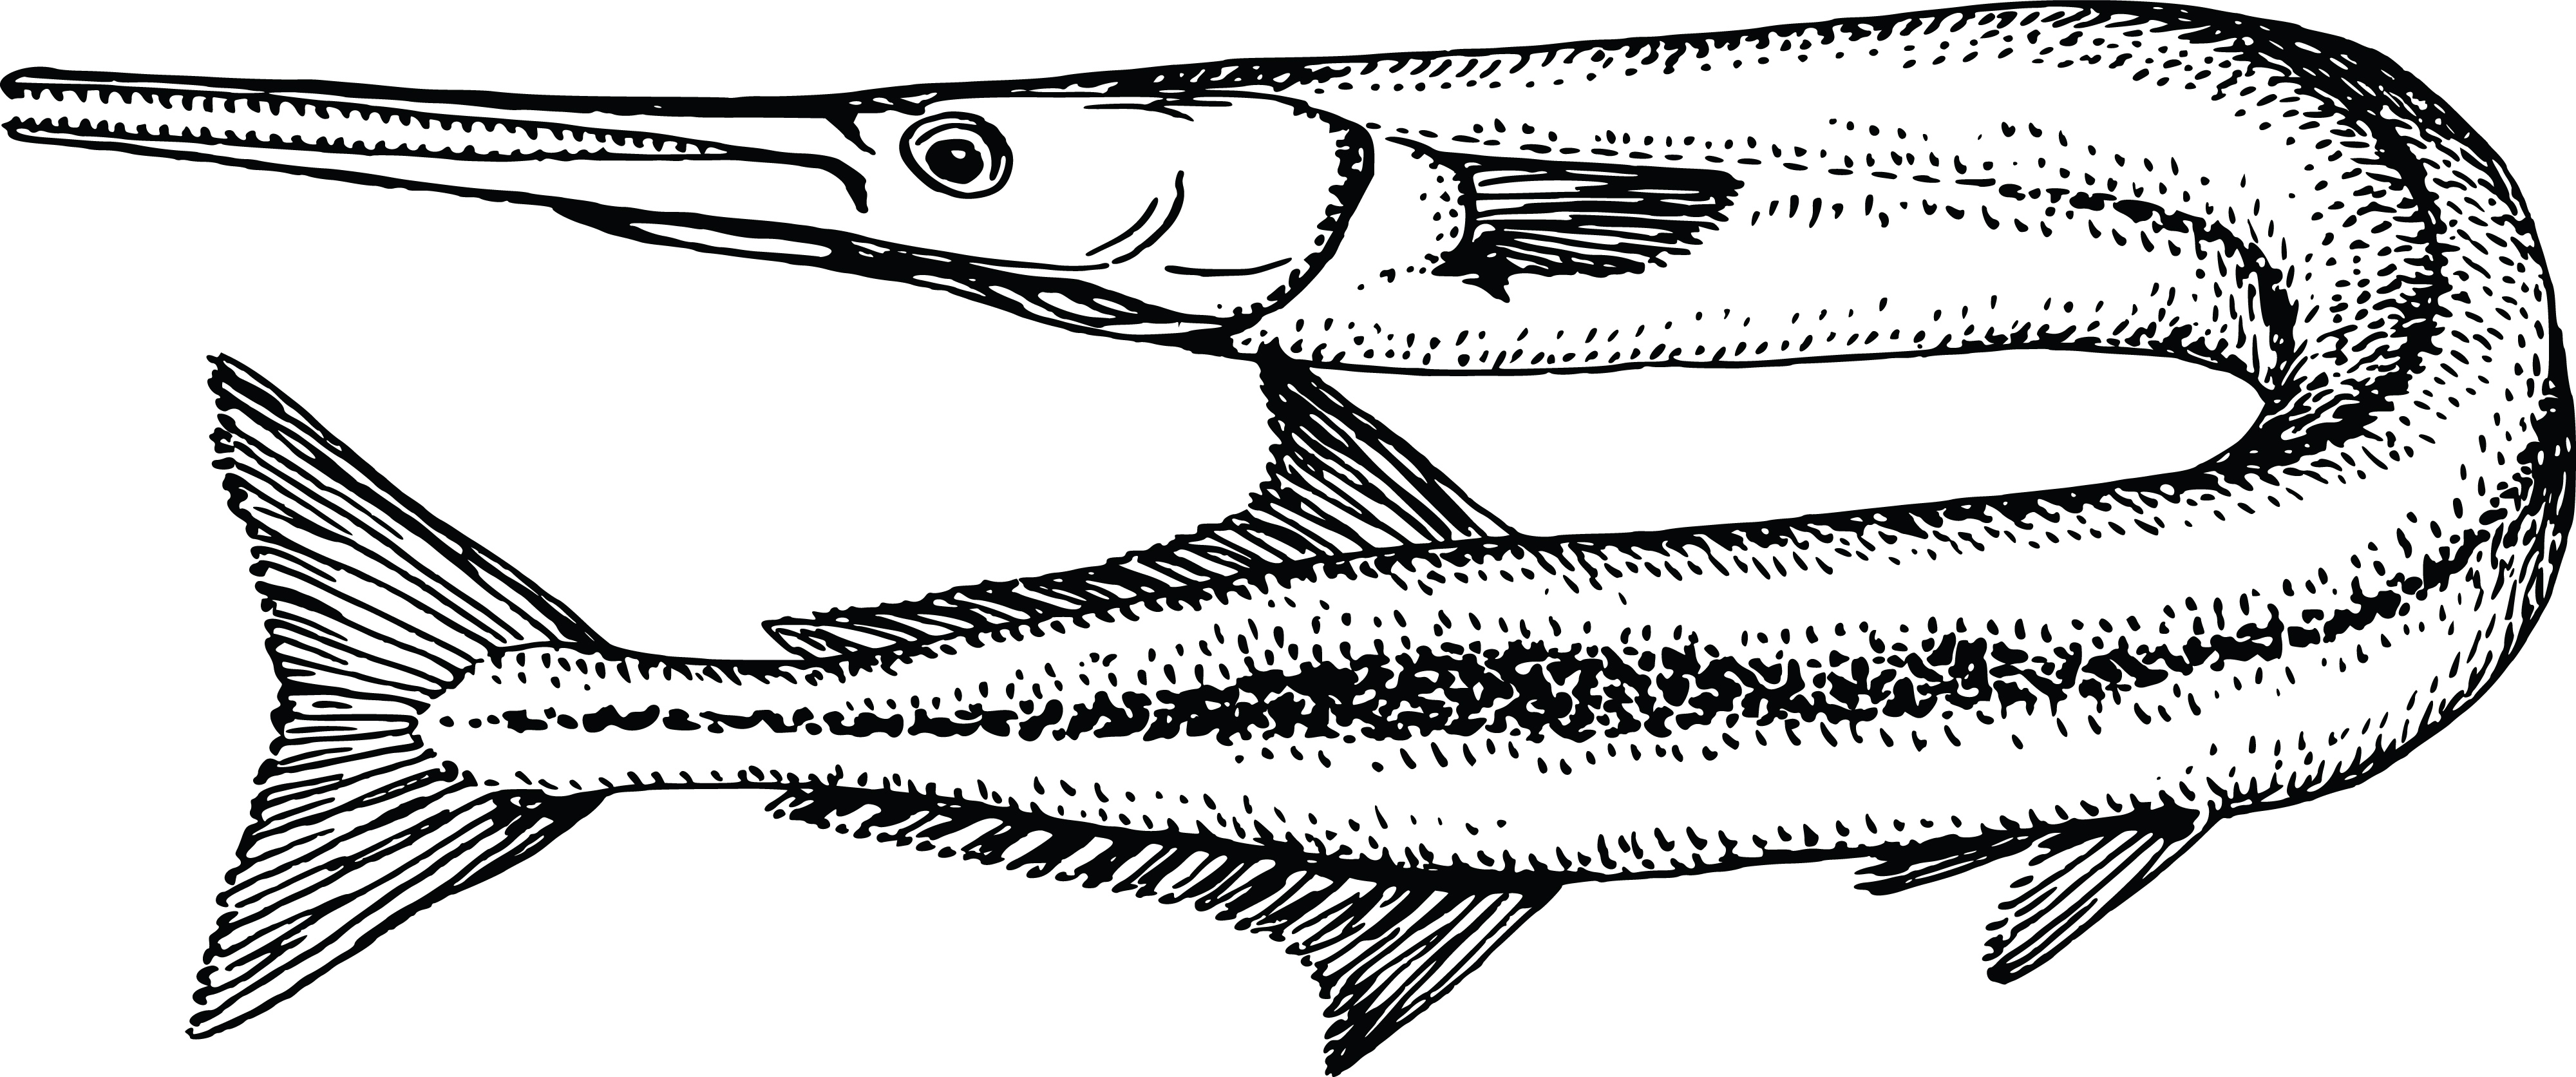 Download Free Clipart Of A Garfish